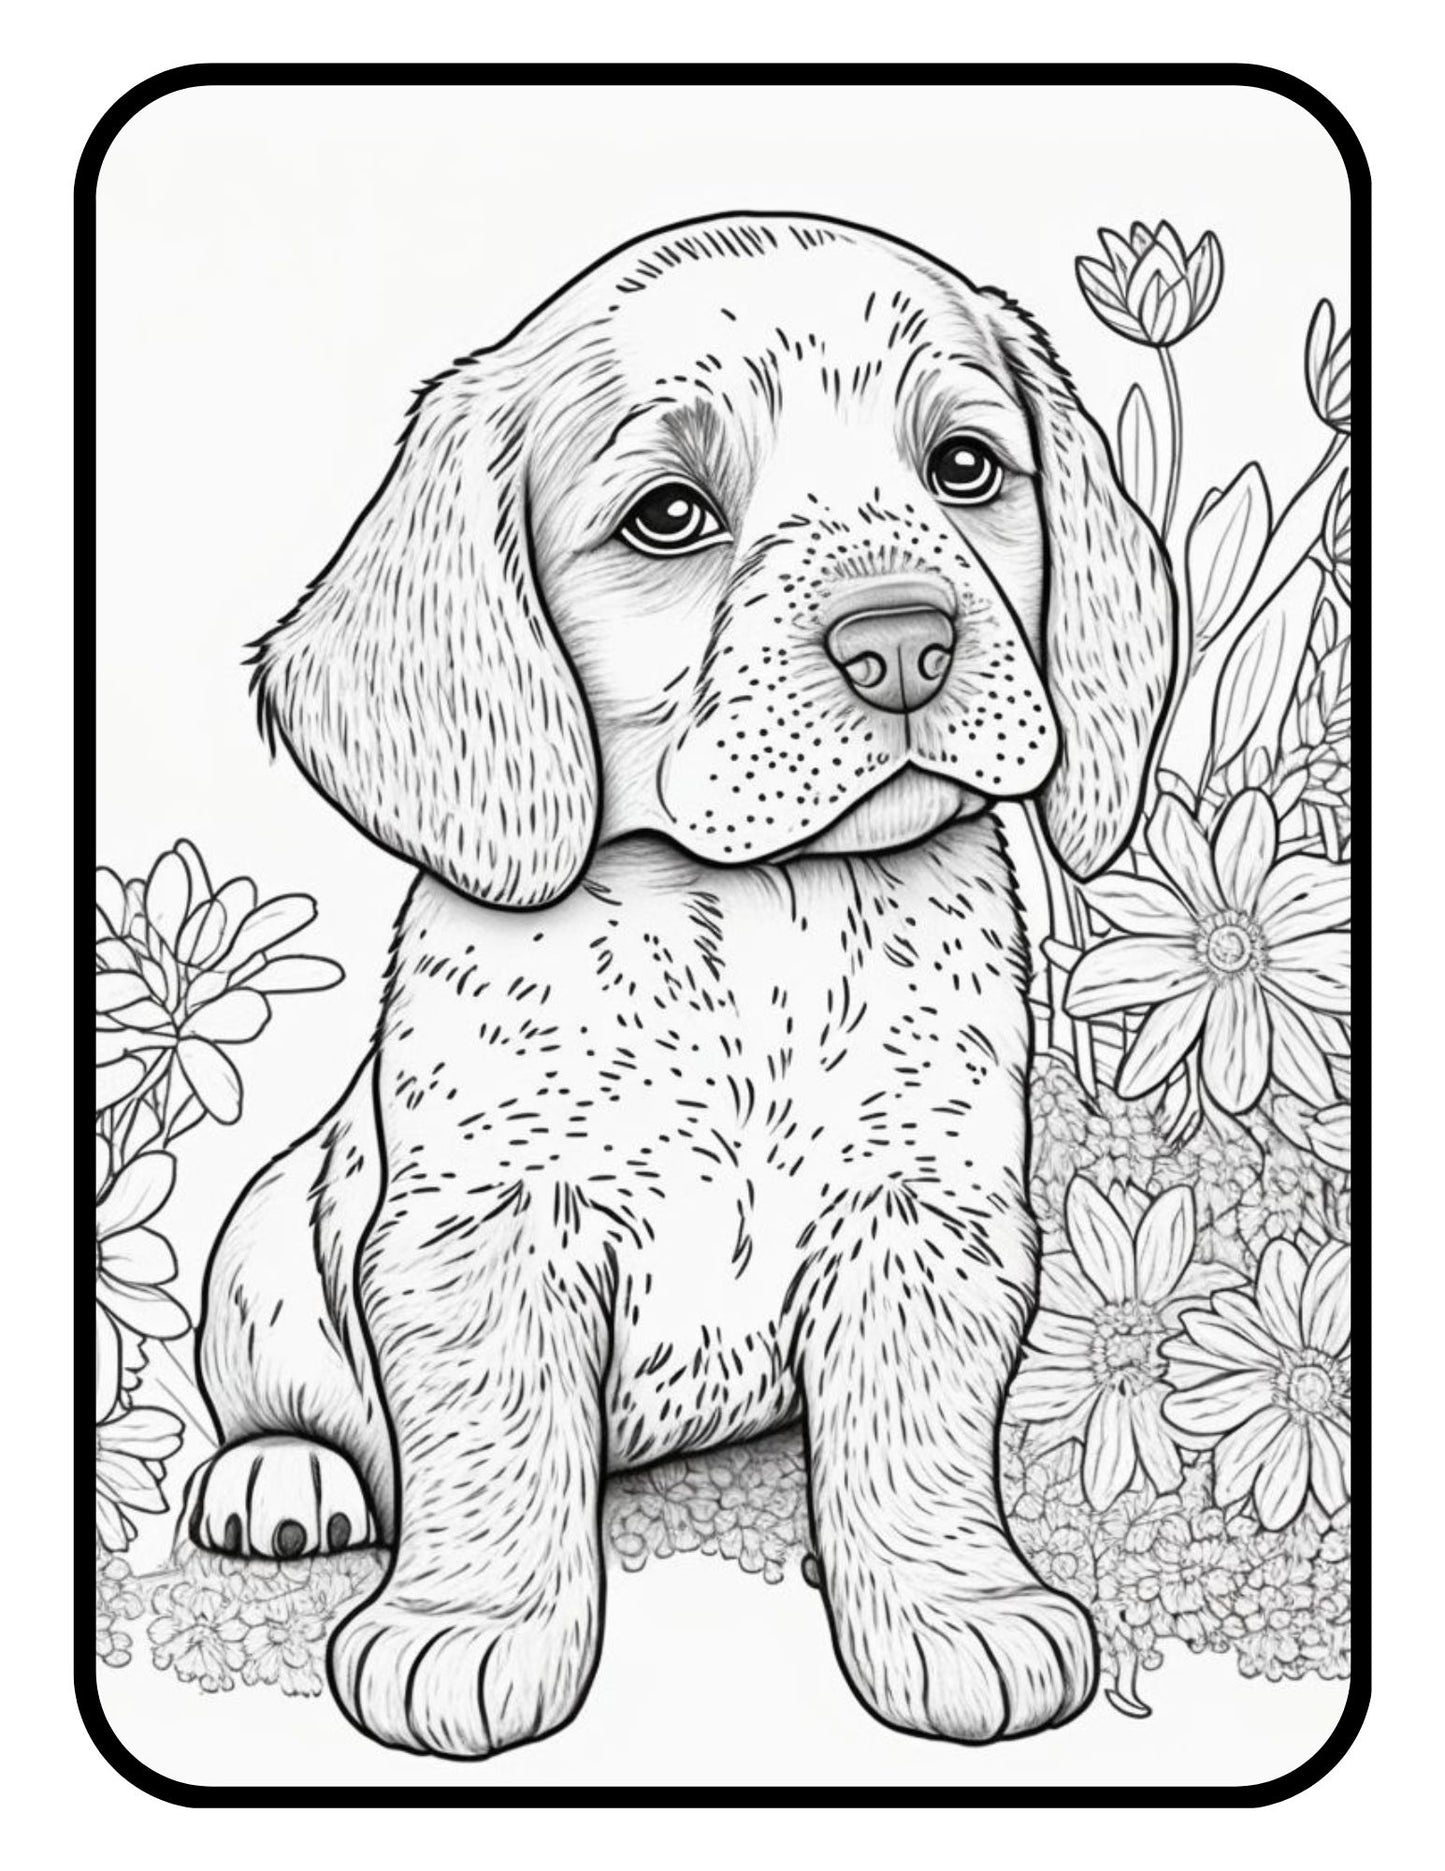 Dog Puppy Coloring Book Coloring Pages For Kids Adults Girls Boys Teens Dogs Puppy Animal Coloring Pages Kids Easy Simple Activity Coloring